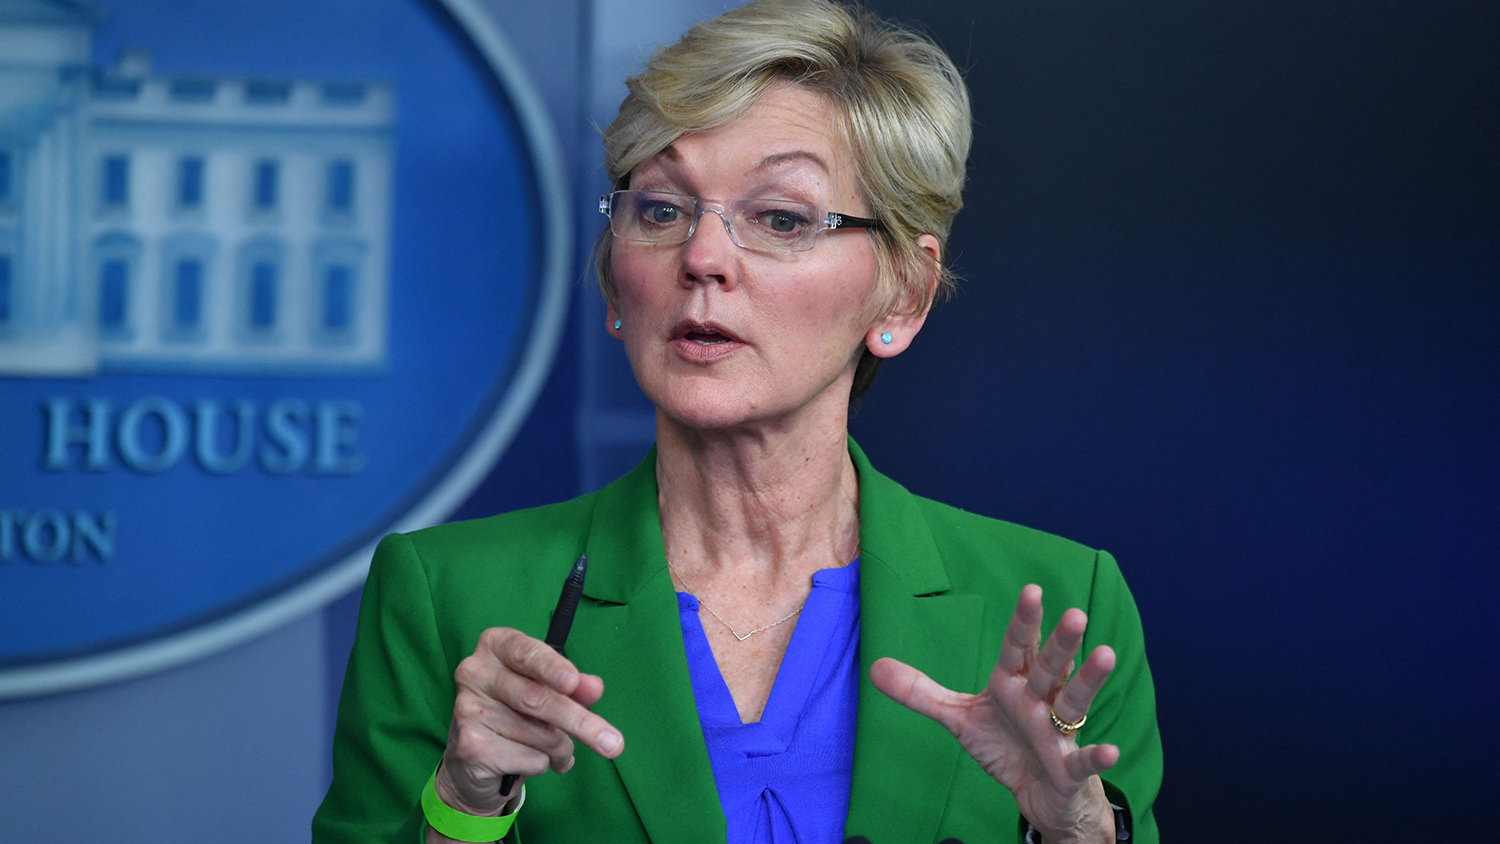 Secretary of Energy Jennifer Granholm holds a press briefing in the Brady Briefing Room of the White House in Washington on May 11.